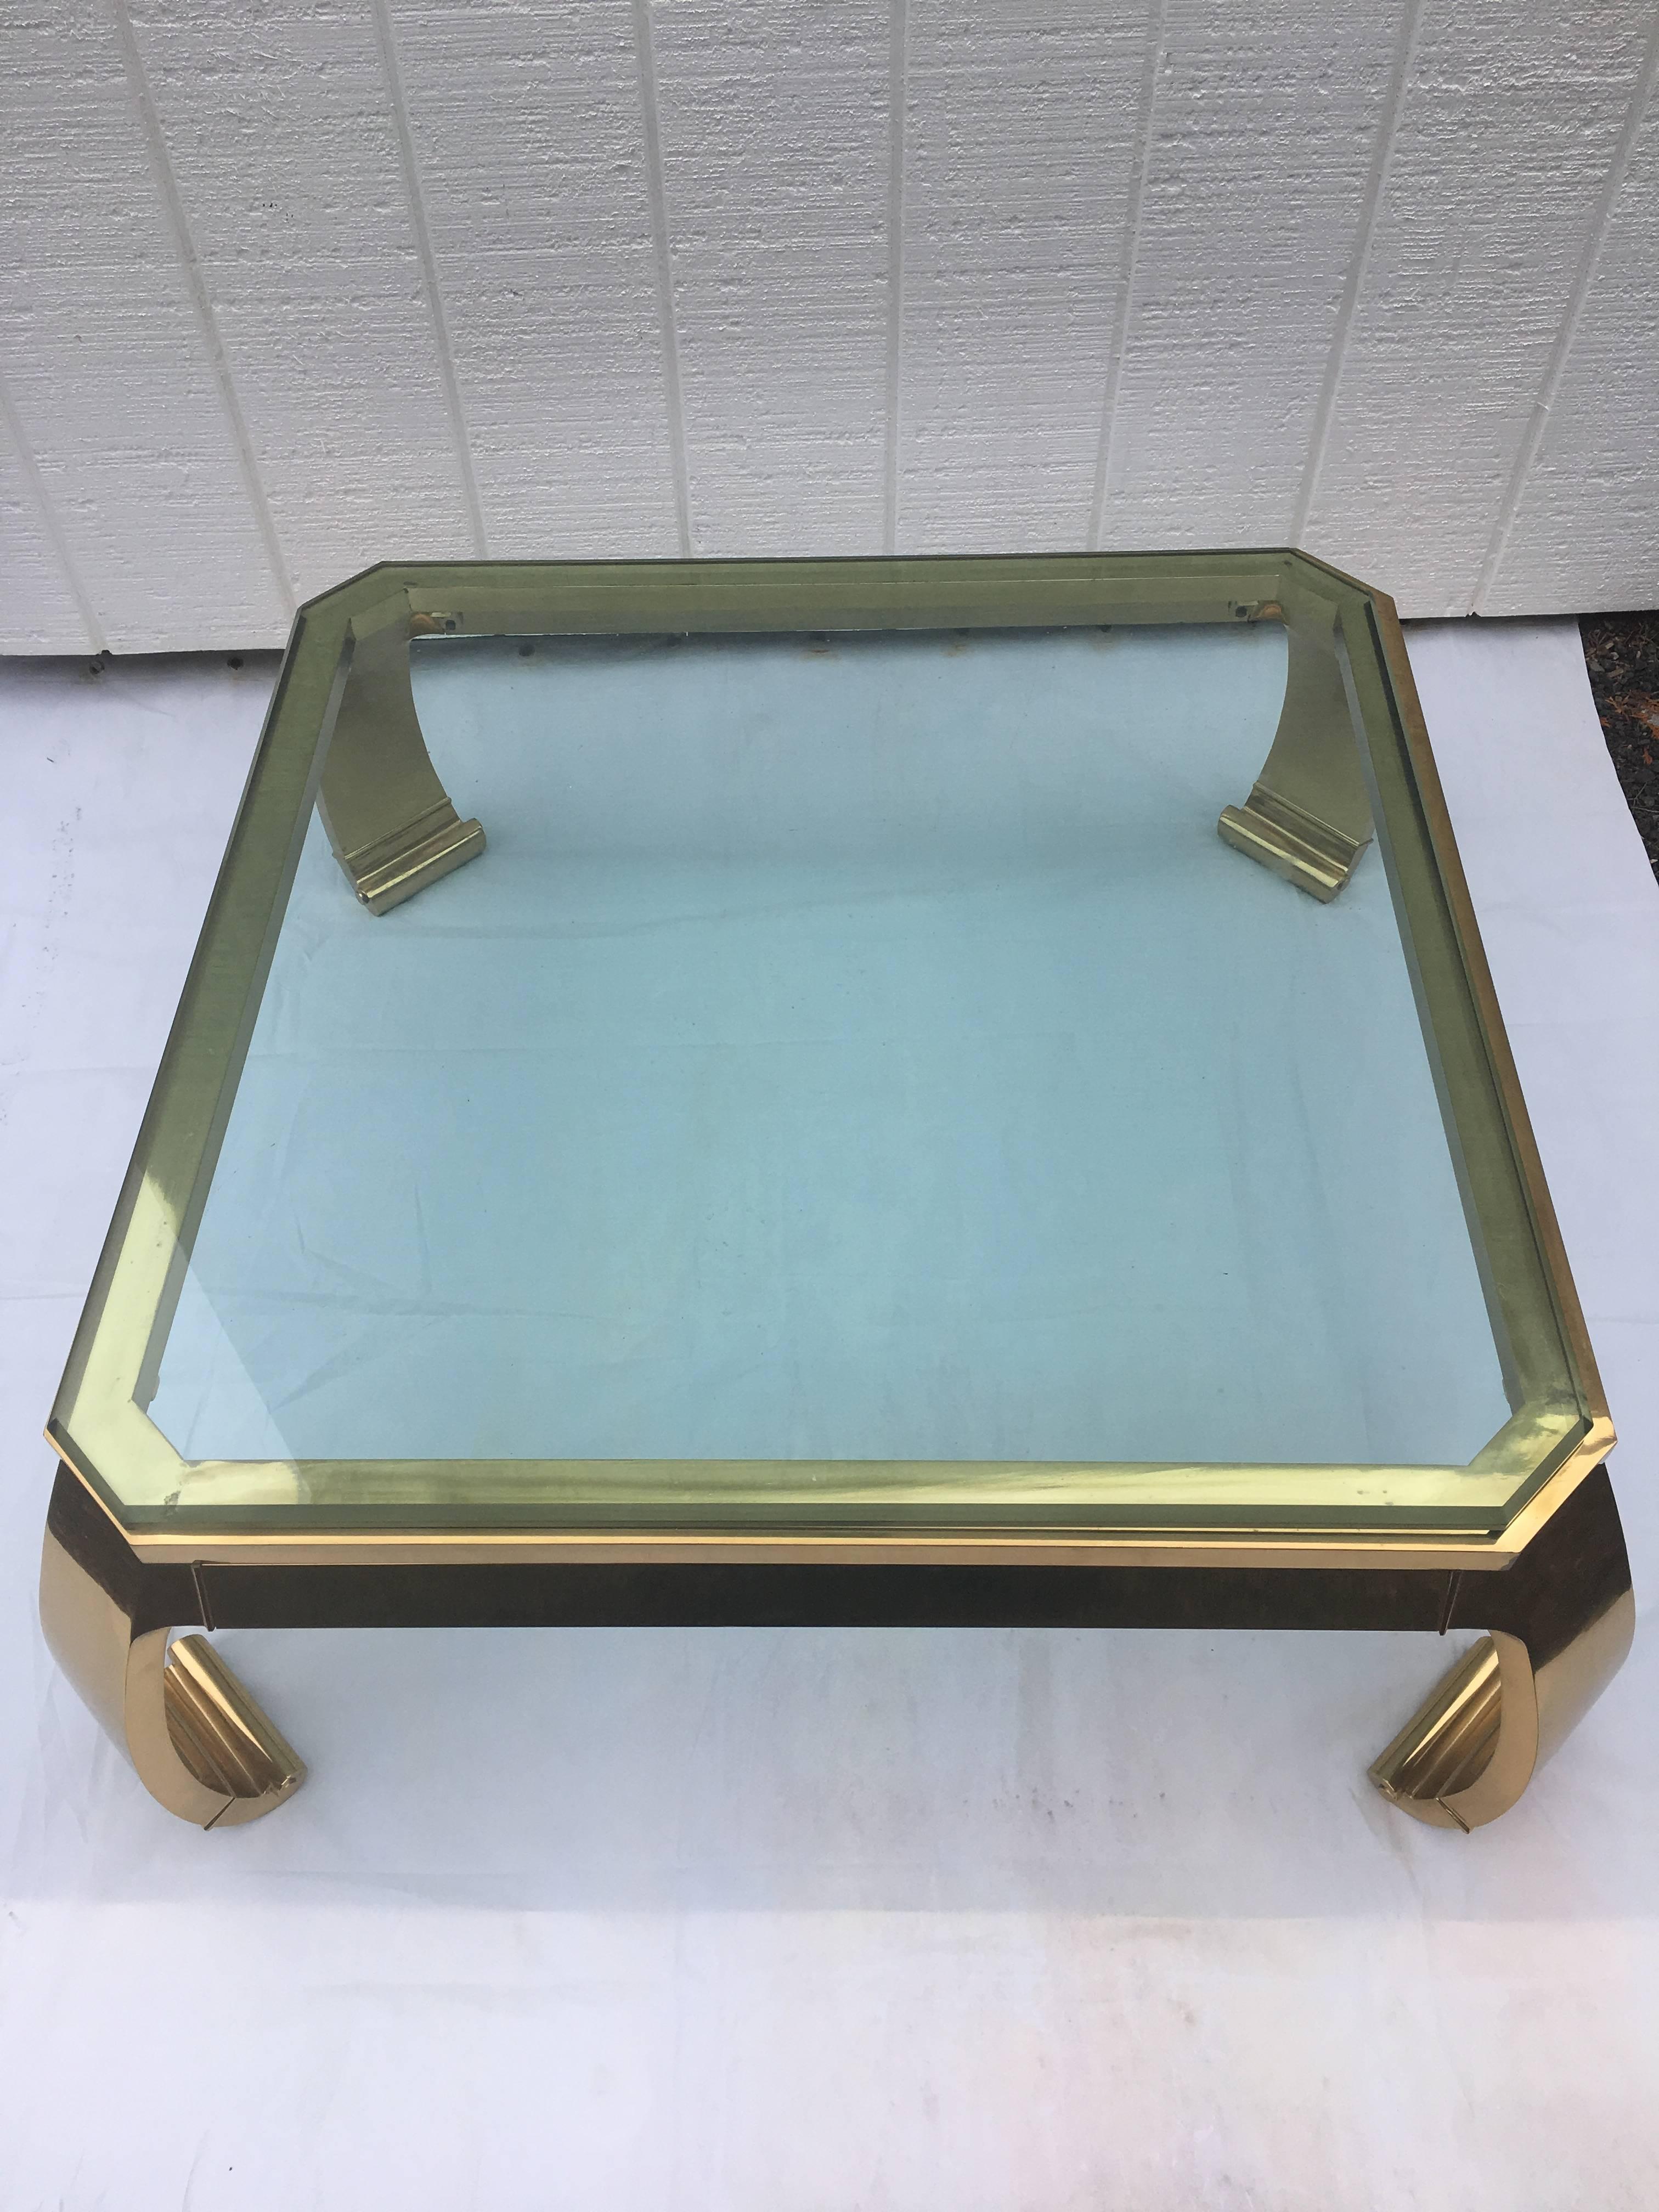  Asian Inspired Brass and Glass Coffee Table attributed to Mastercraft 1